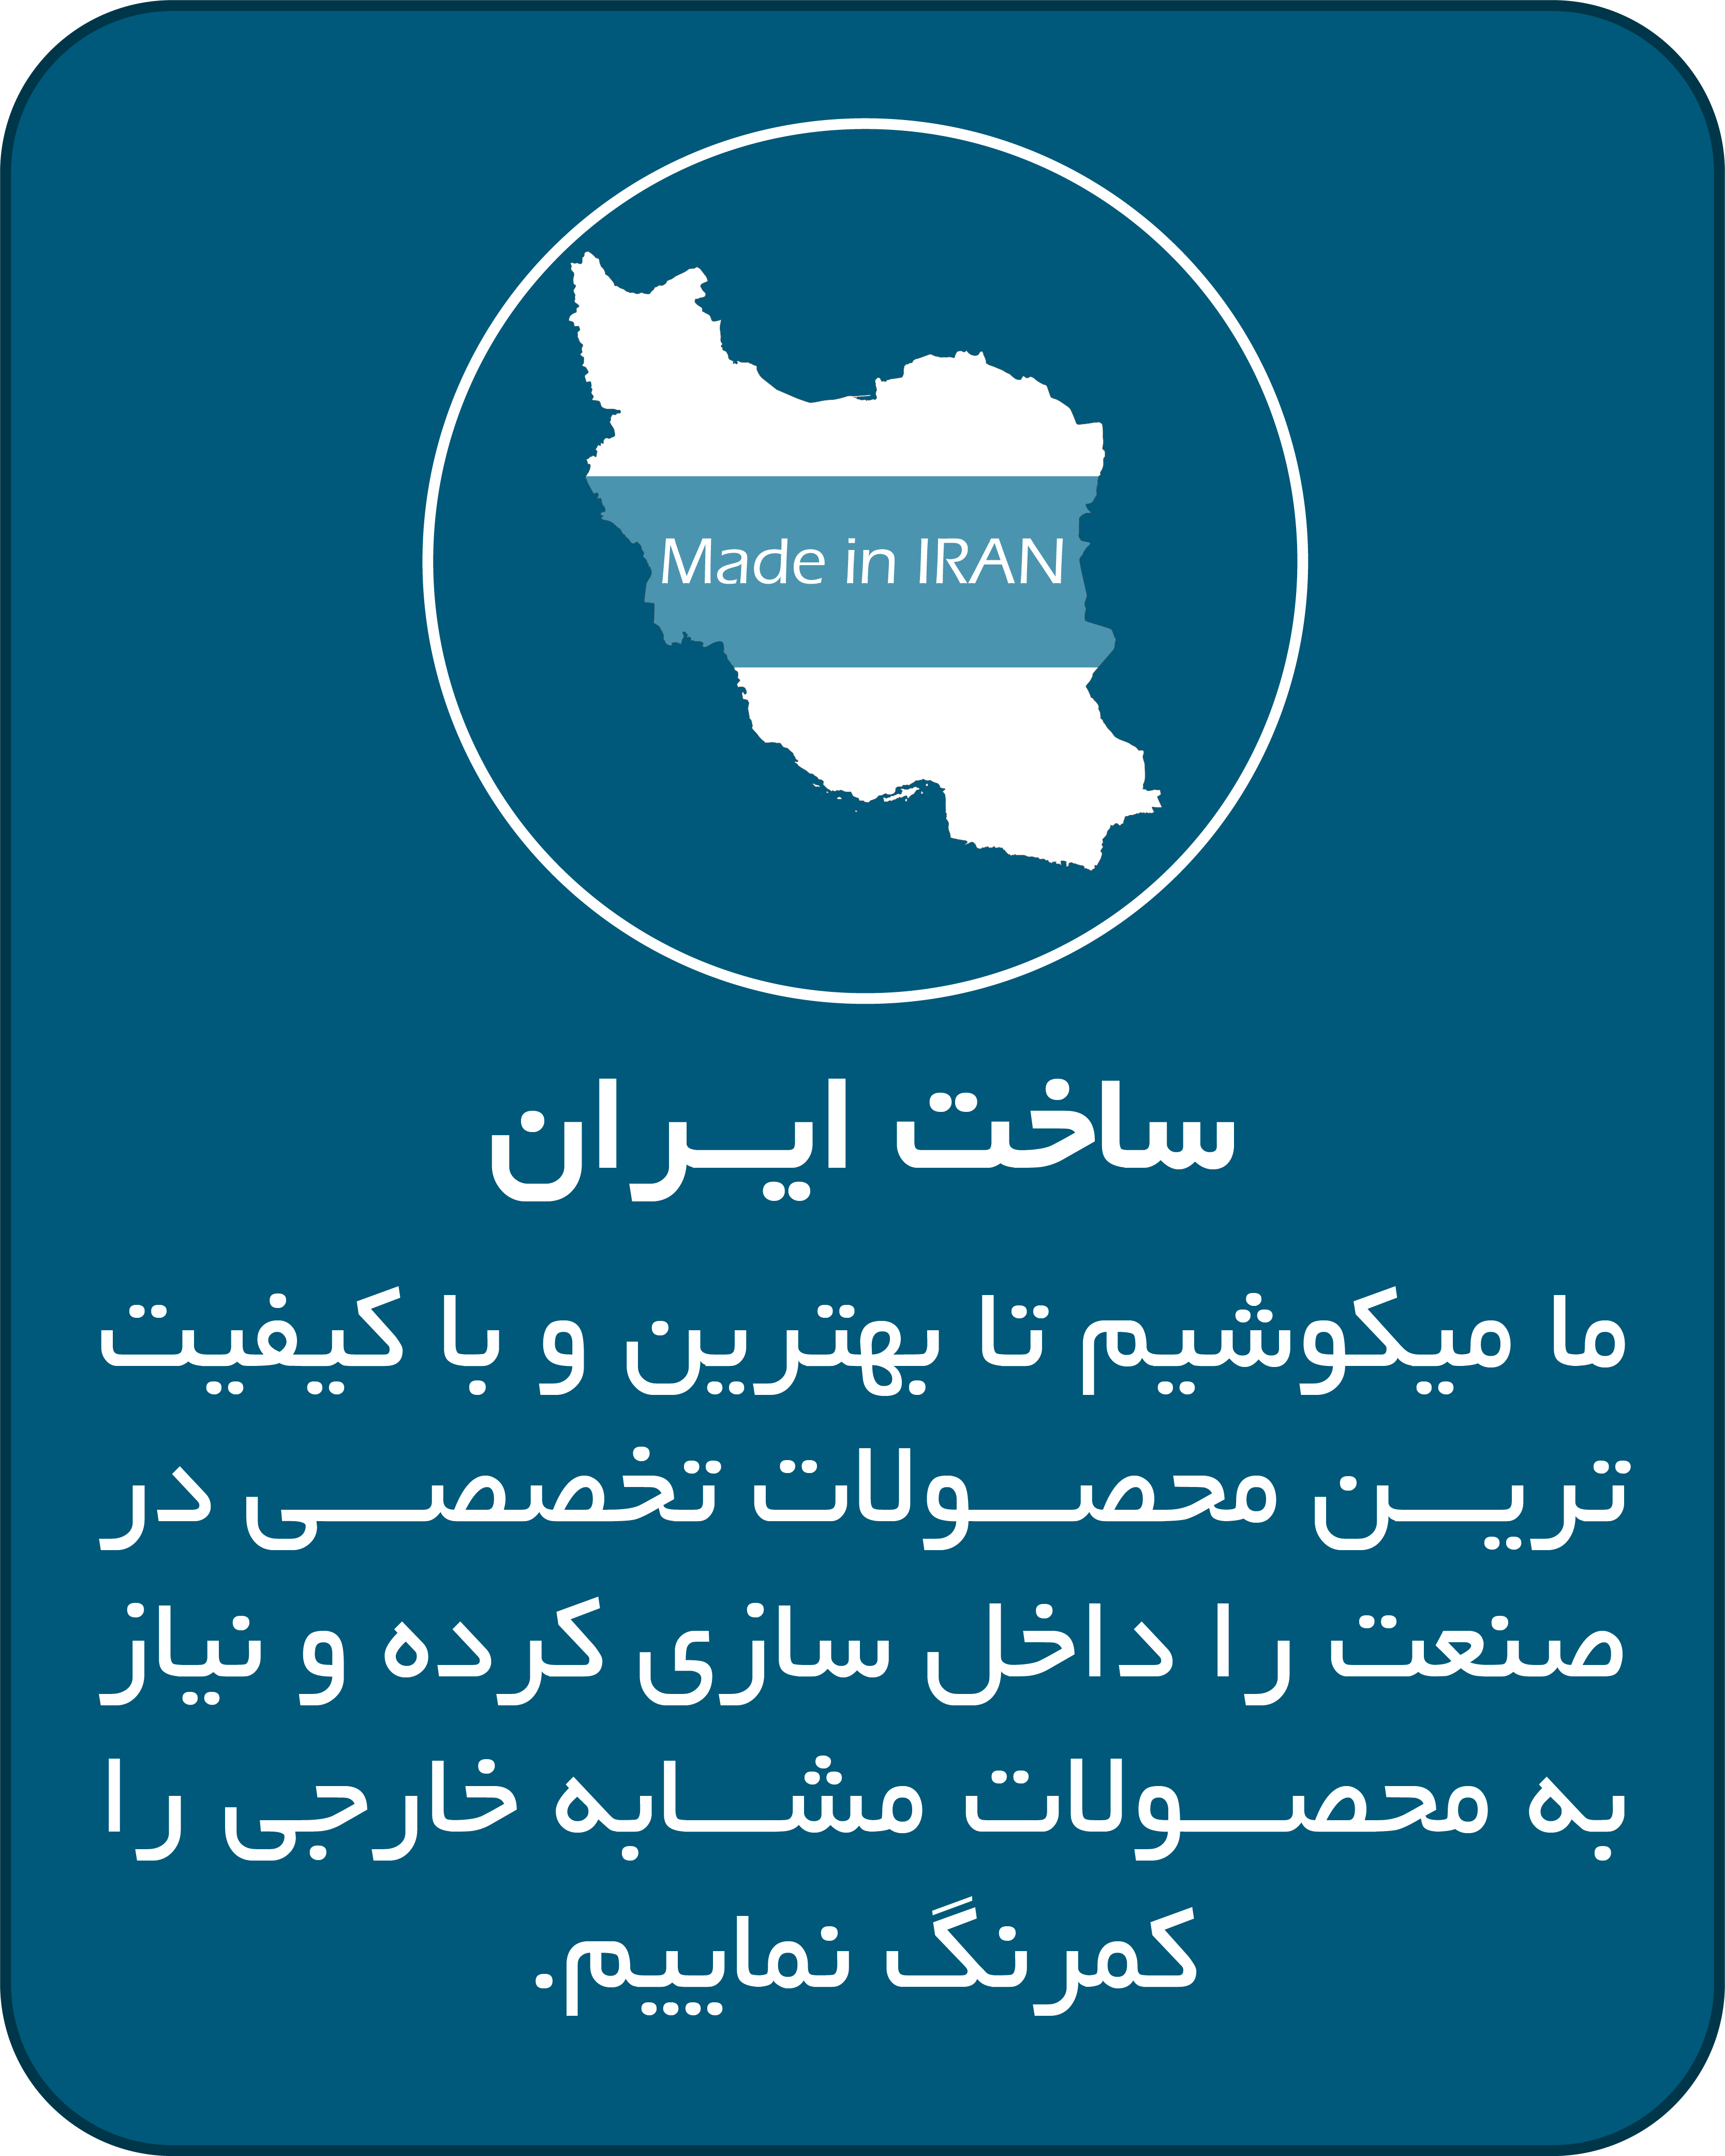 made_in_iran-02